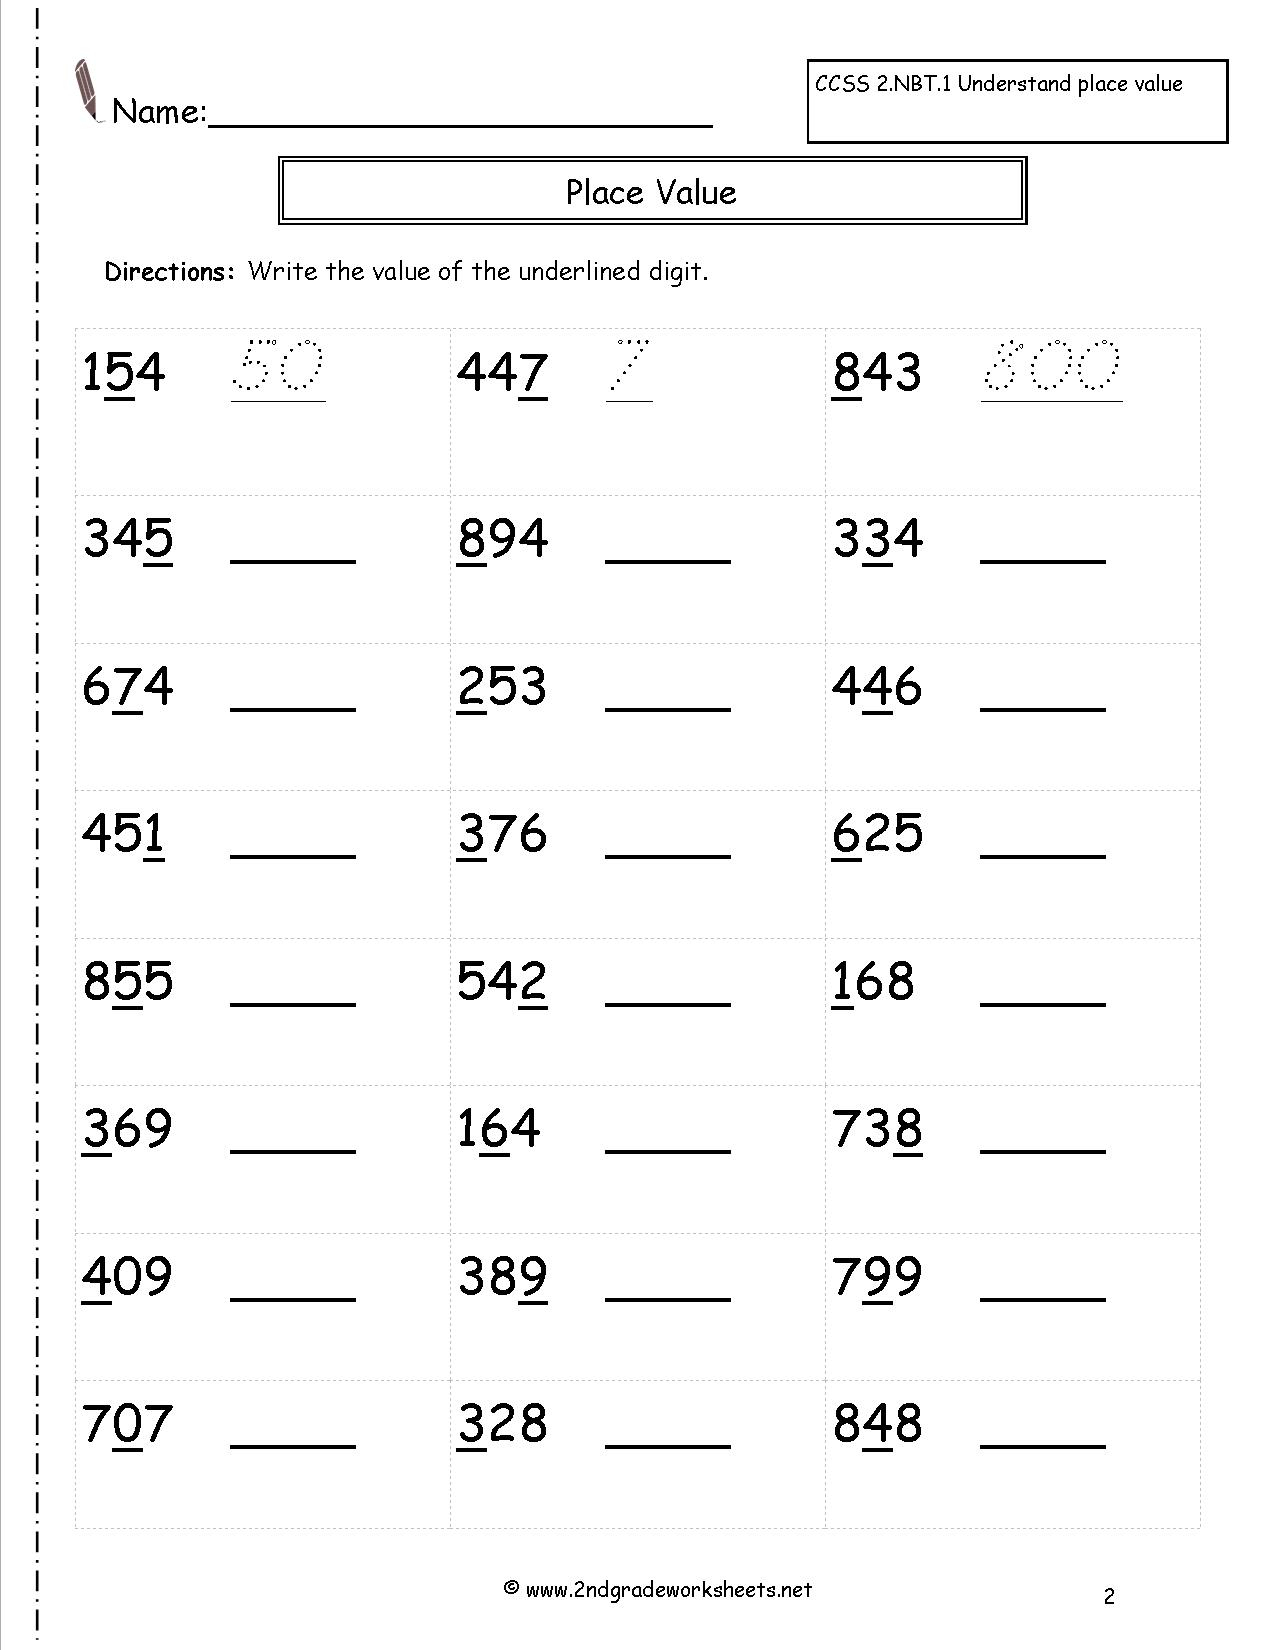 Second Grade Place Value Worksheets - Free Printable Place Value | Free Printable Place Value Worksheets